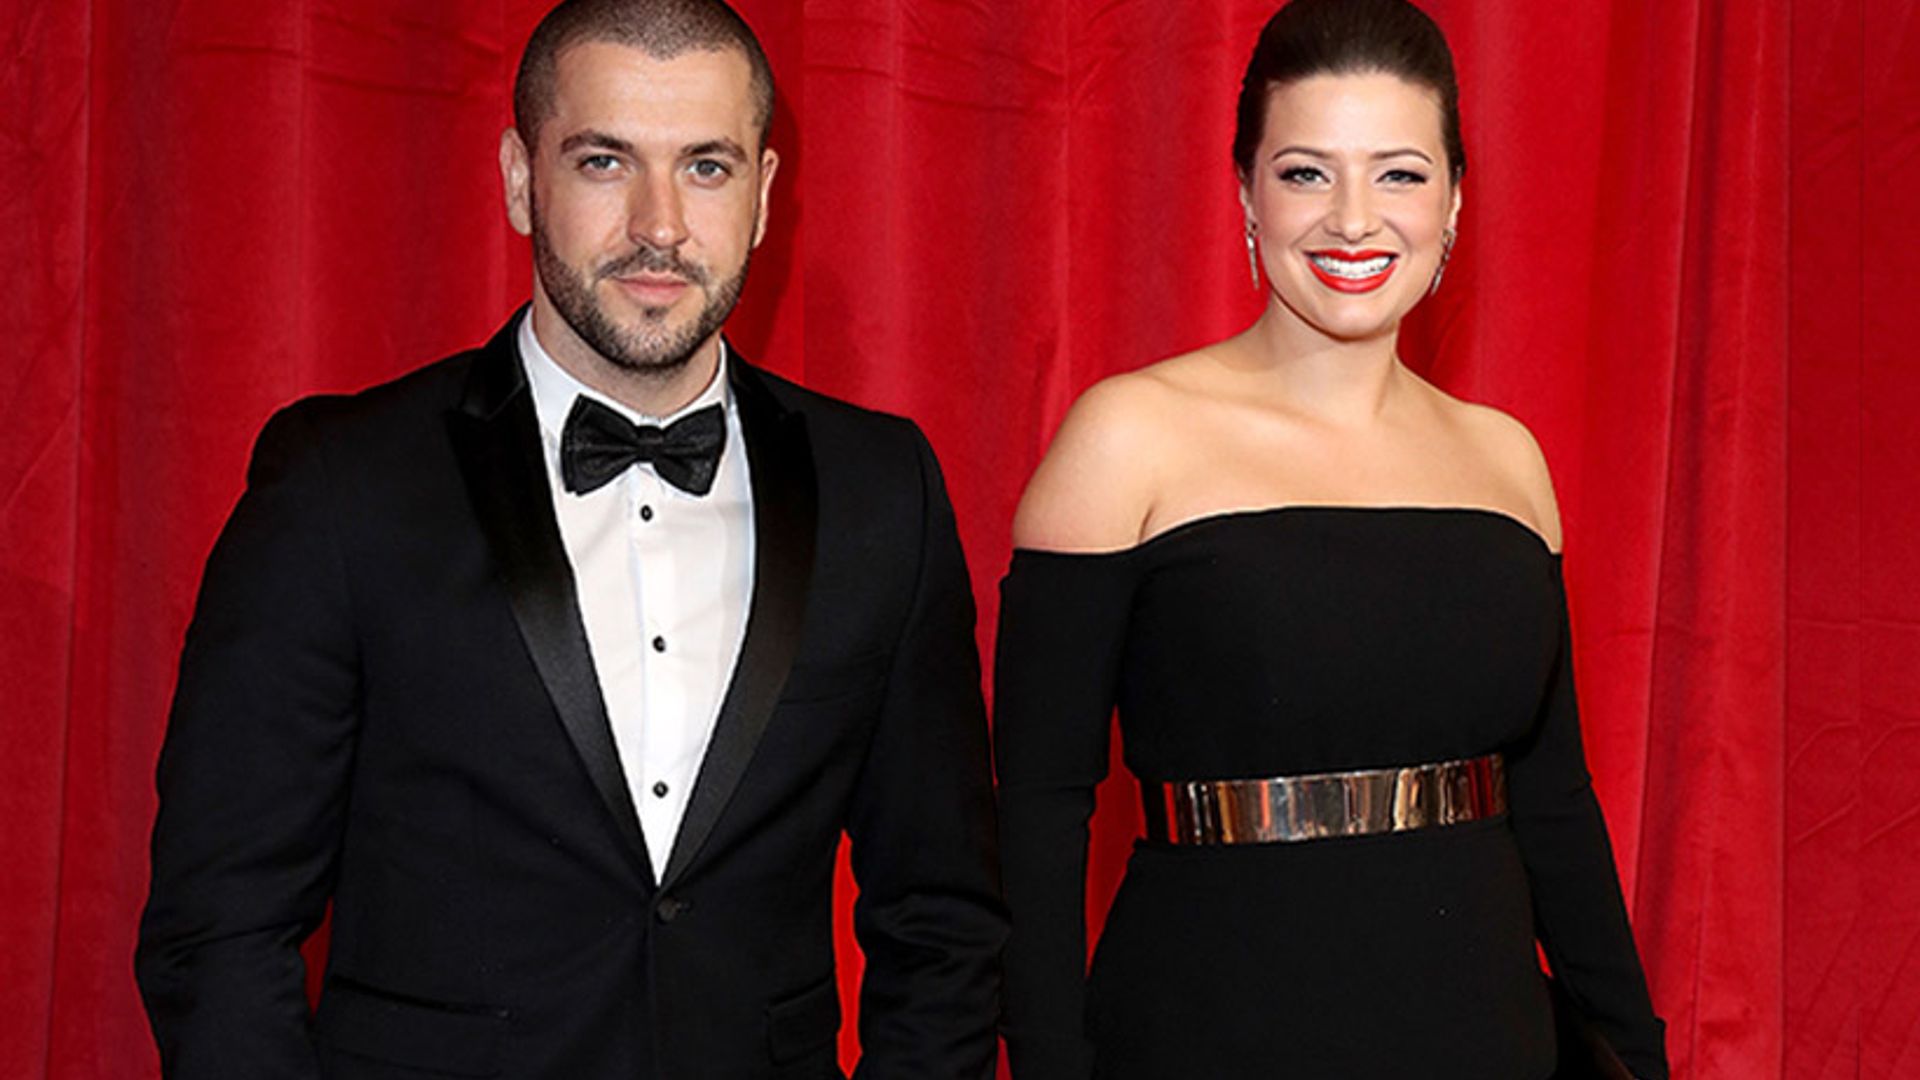 Coronation Street's Shayne Ward expecting first child with Hollyoaks star Sophie Austin